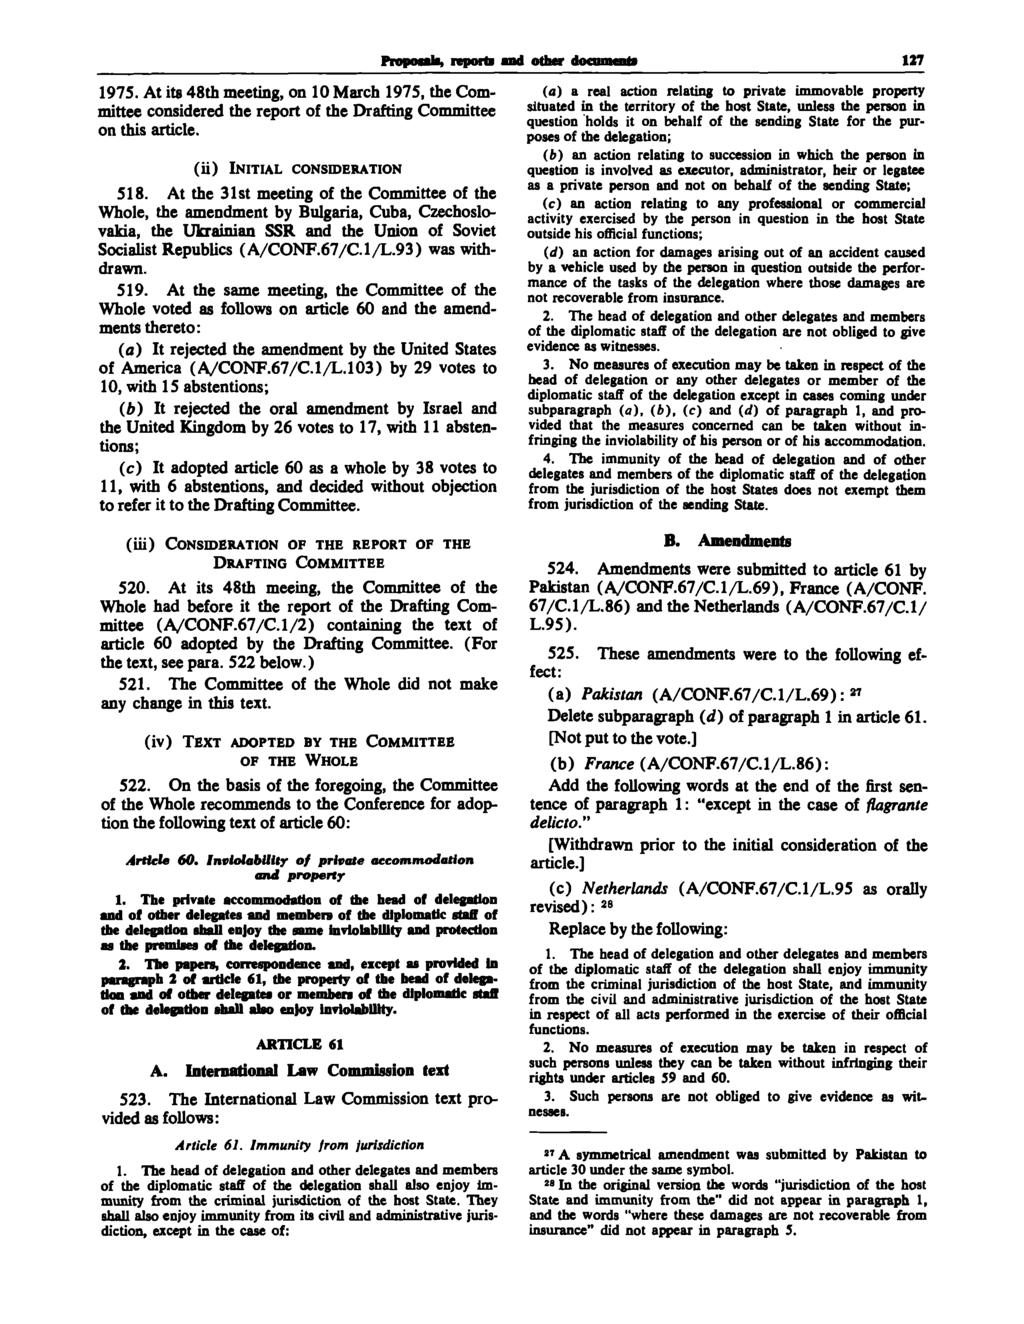 197S. At its 48th meeting, on 10 March 197S, the Committee considered the report of the Drafting Committee on this article. (ii) INITIAL CONSIDERATION 518.